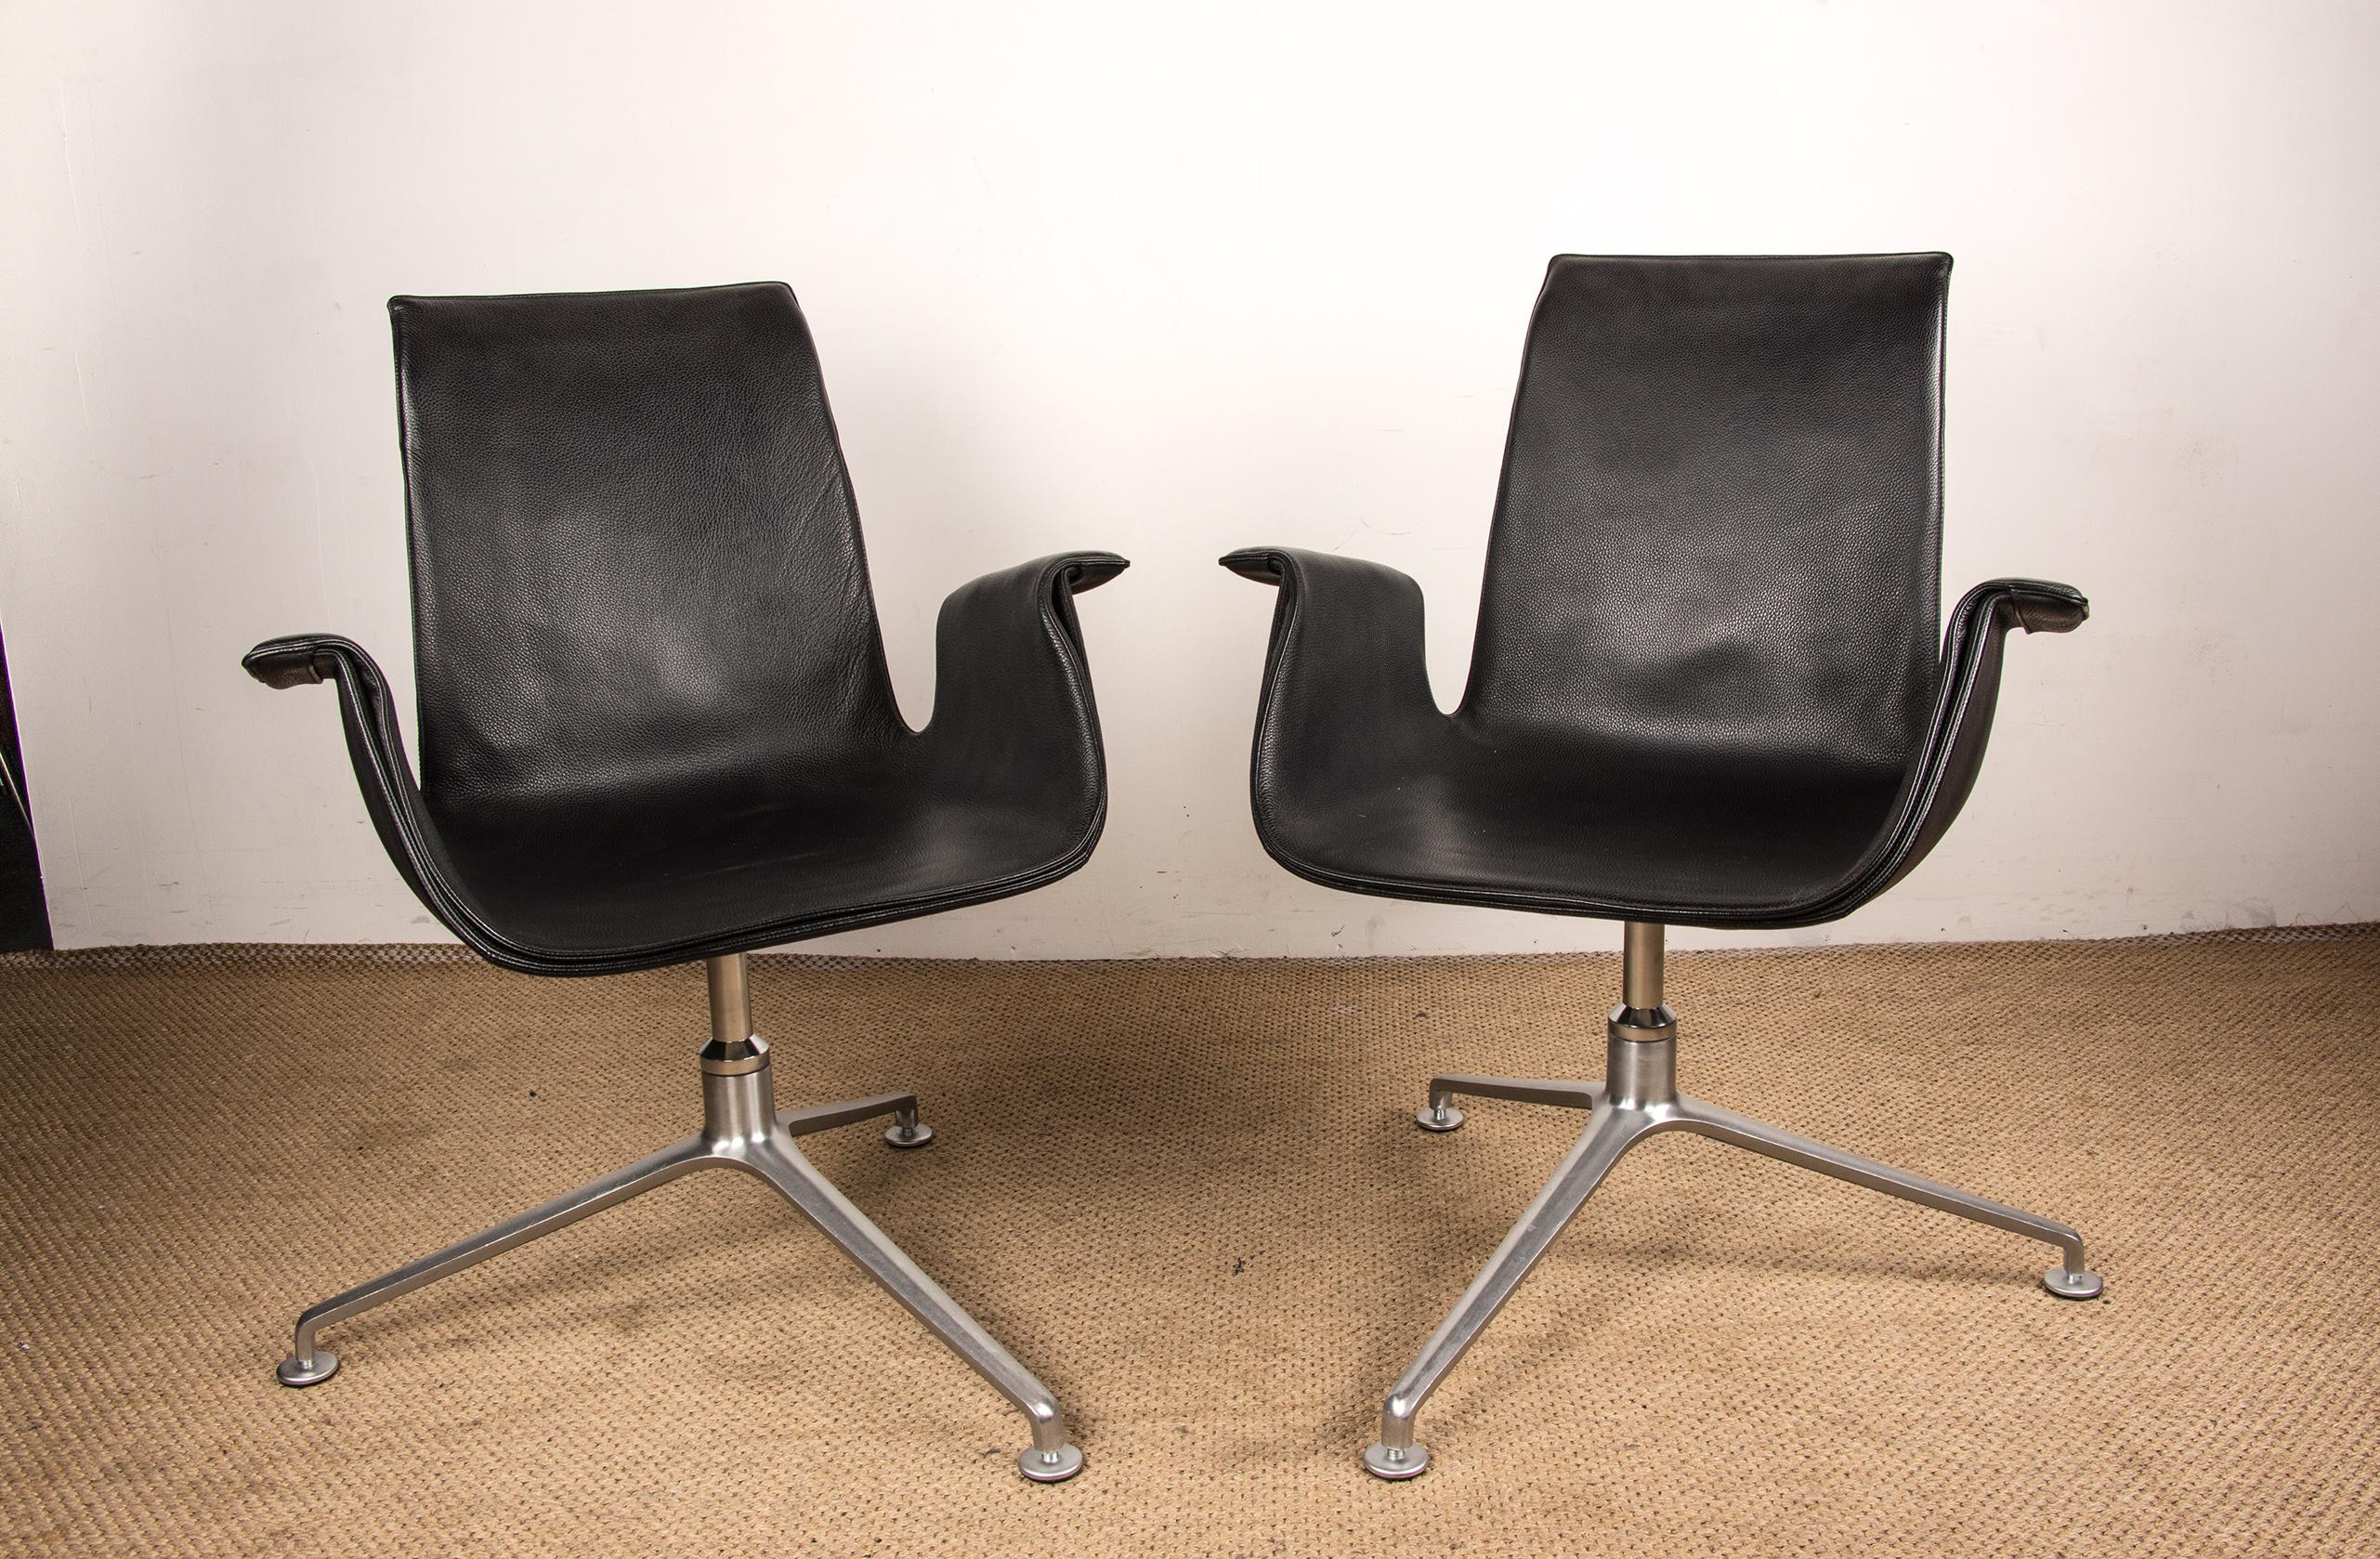 2 Danish deskchairs, Leather and steel, “Tulip chair” by Fabricius & Kalsthom. For Sale 6